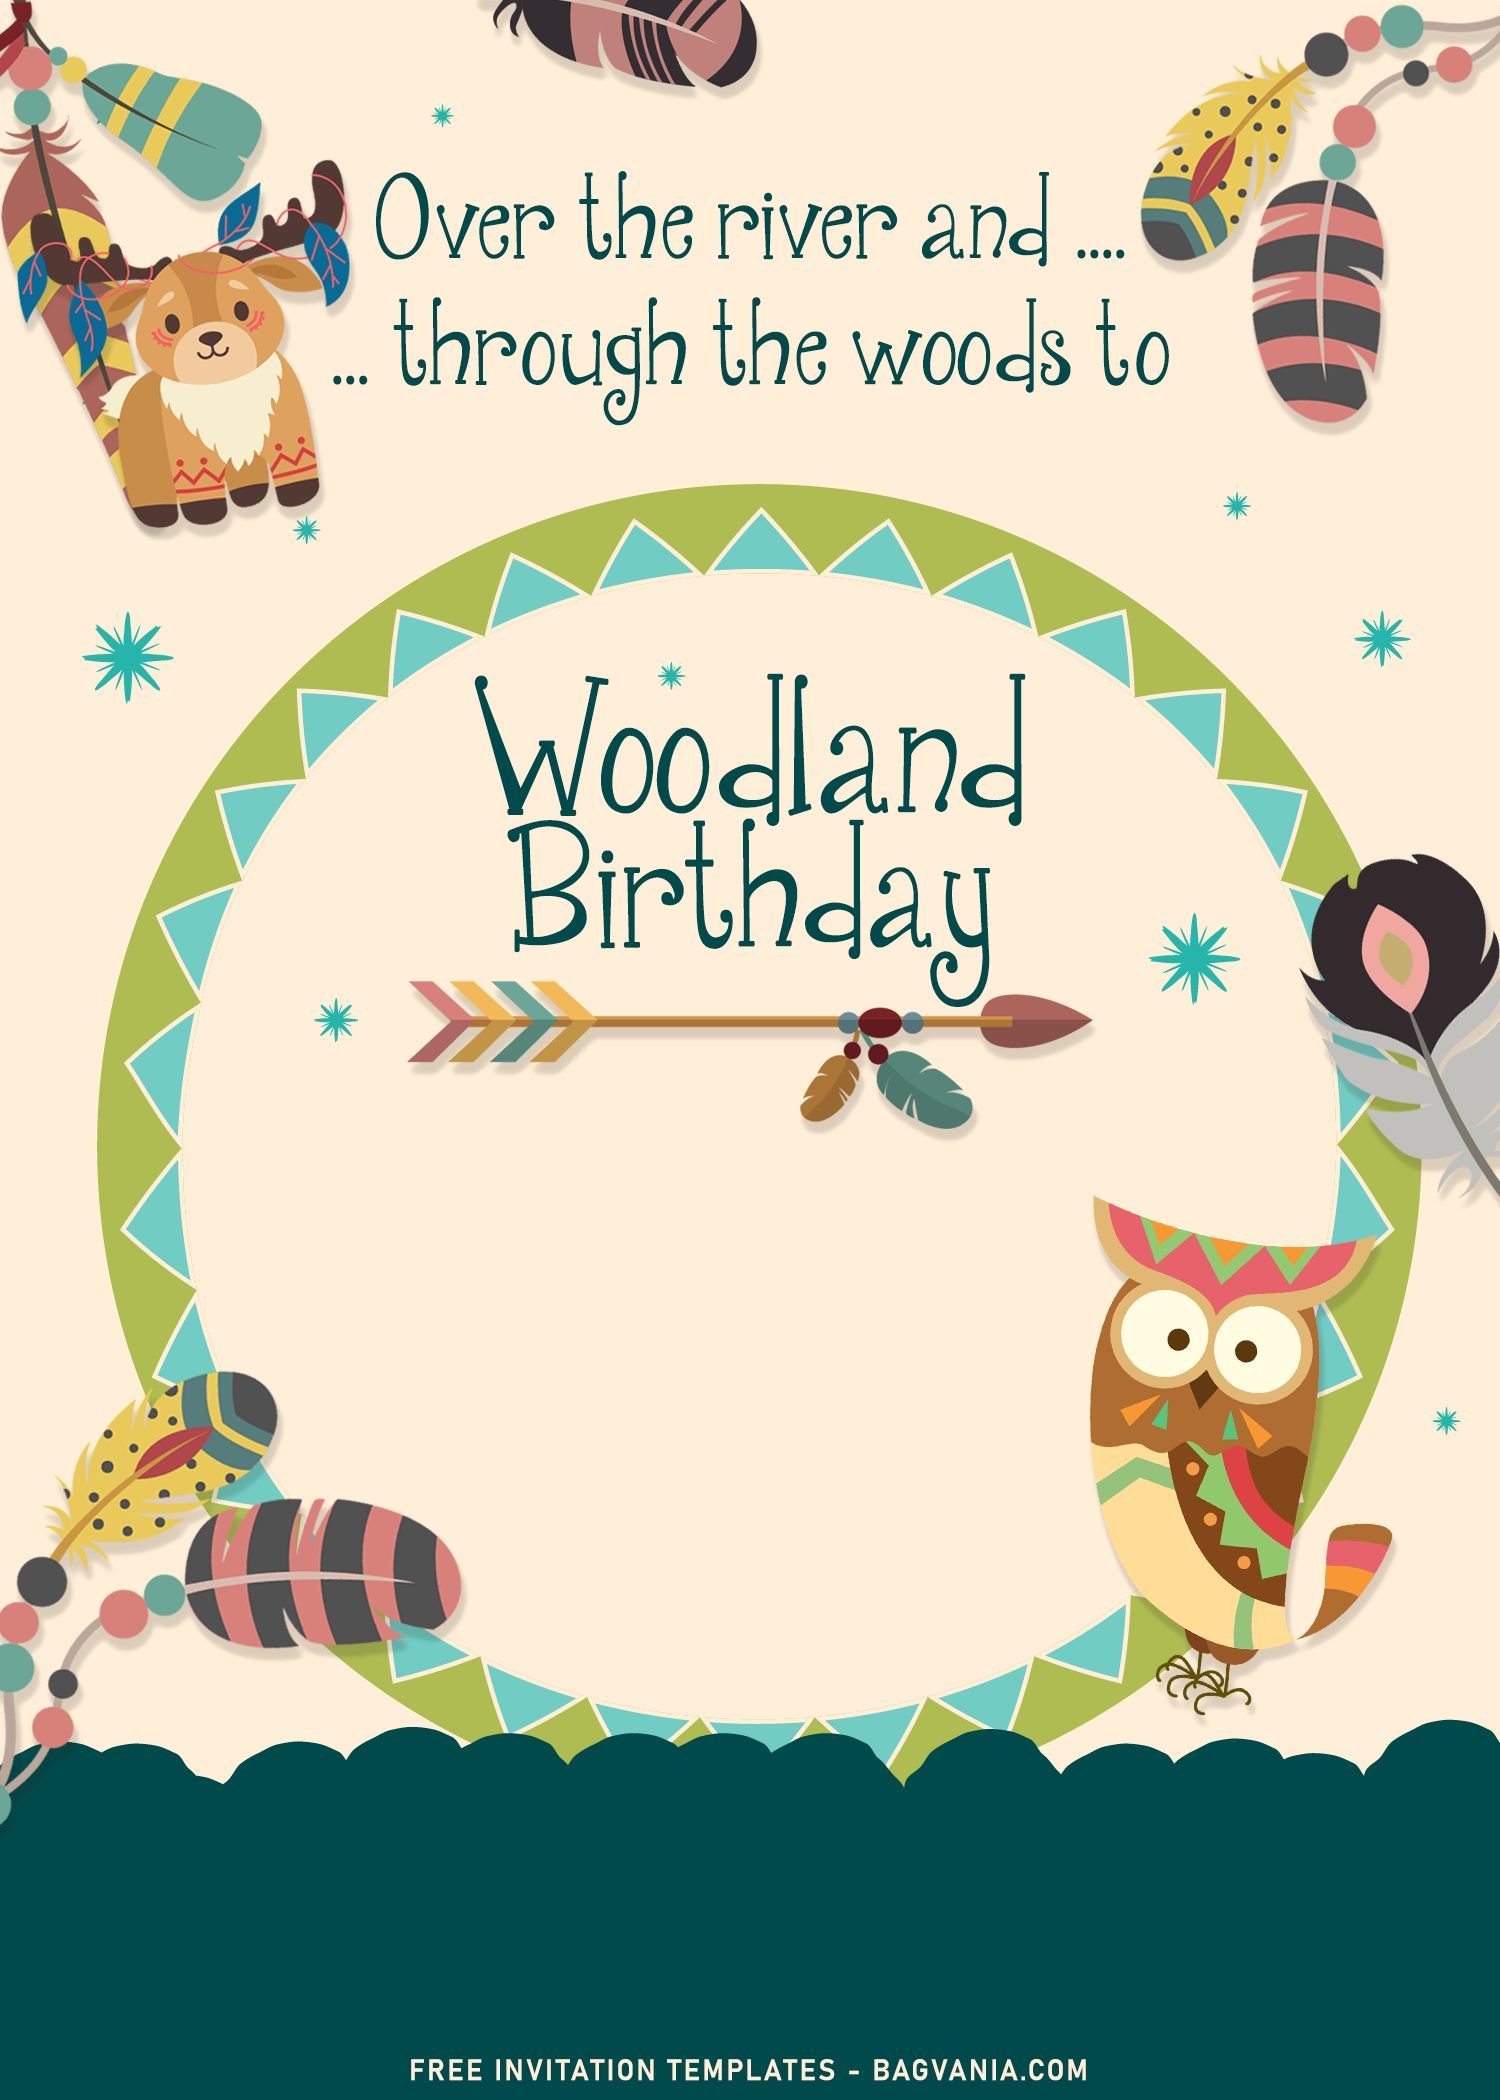 7+ Woodland Birthday Invitation Templates For Your Little Animal Lover  Birthday | FREE Printable Birthday Invitation Templates - Bagvania